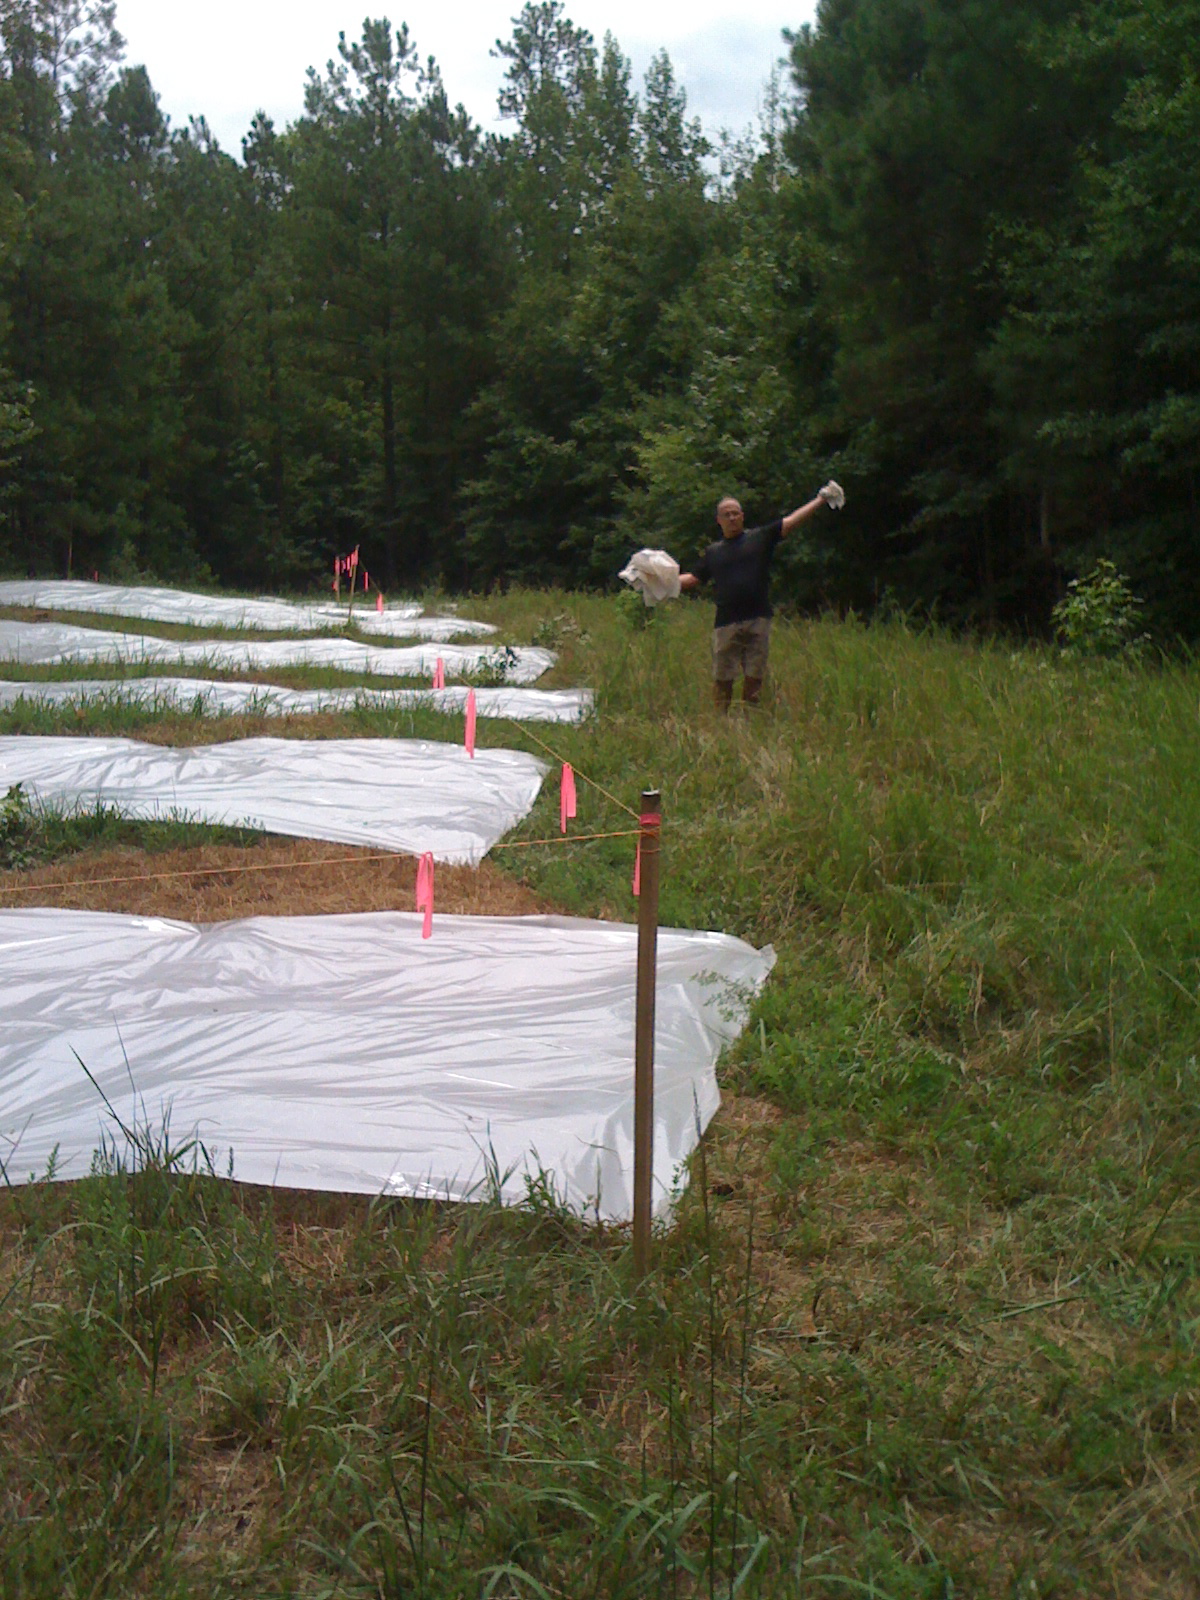 Re-covering the beds with clear plastic for solarization.